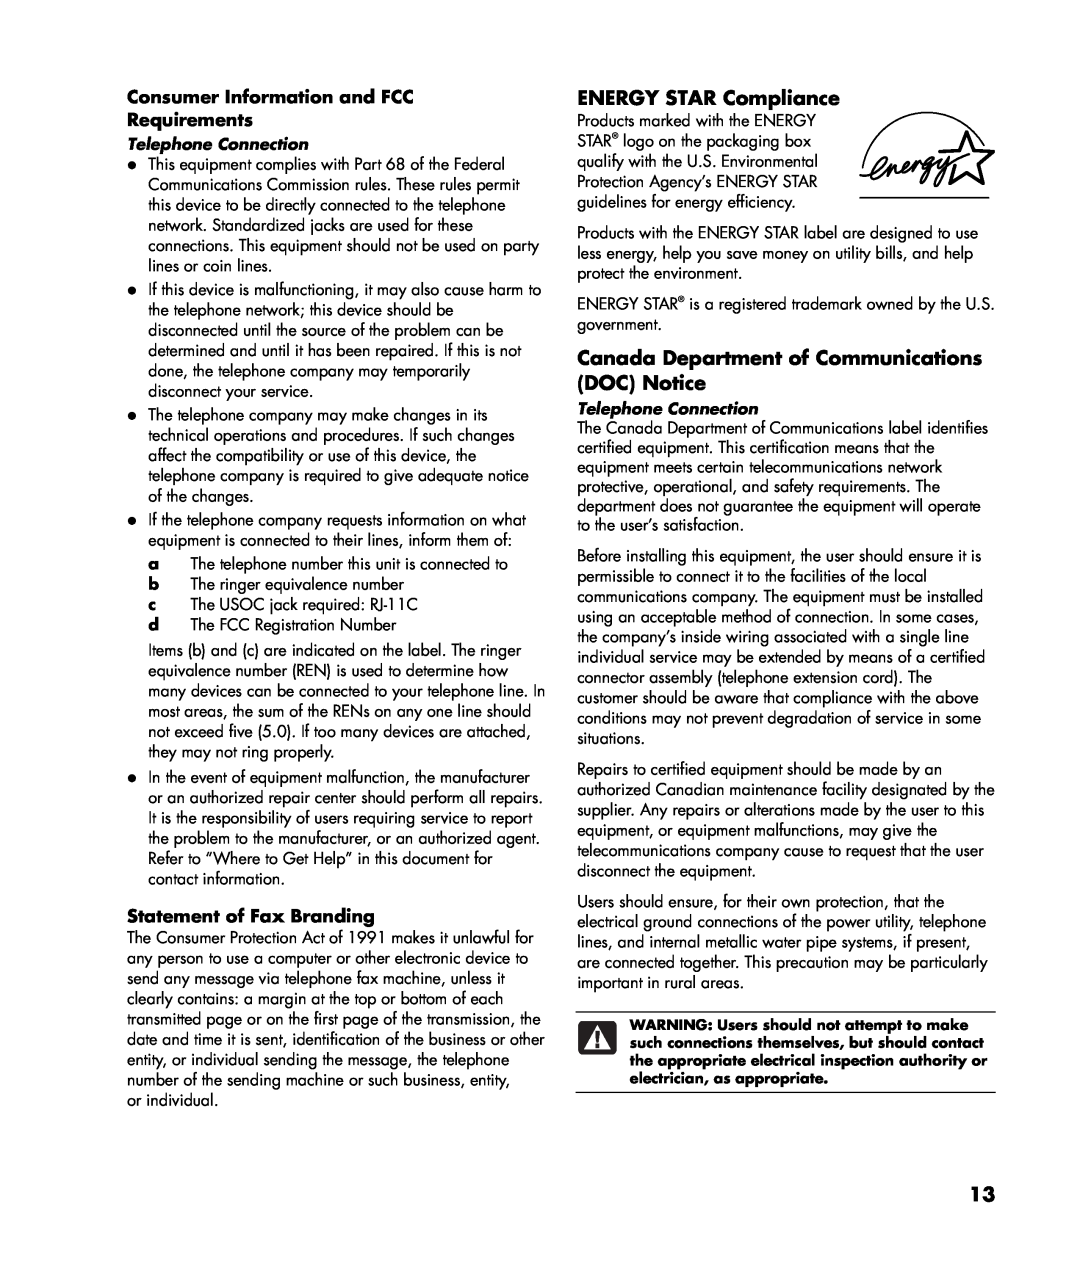 HP a1118x, a1163w, a1173w ENERGY STAR Compliance, Canada Department of Communications DOC Notice, Statement of Fax Branding 